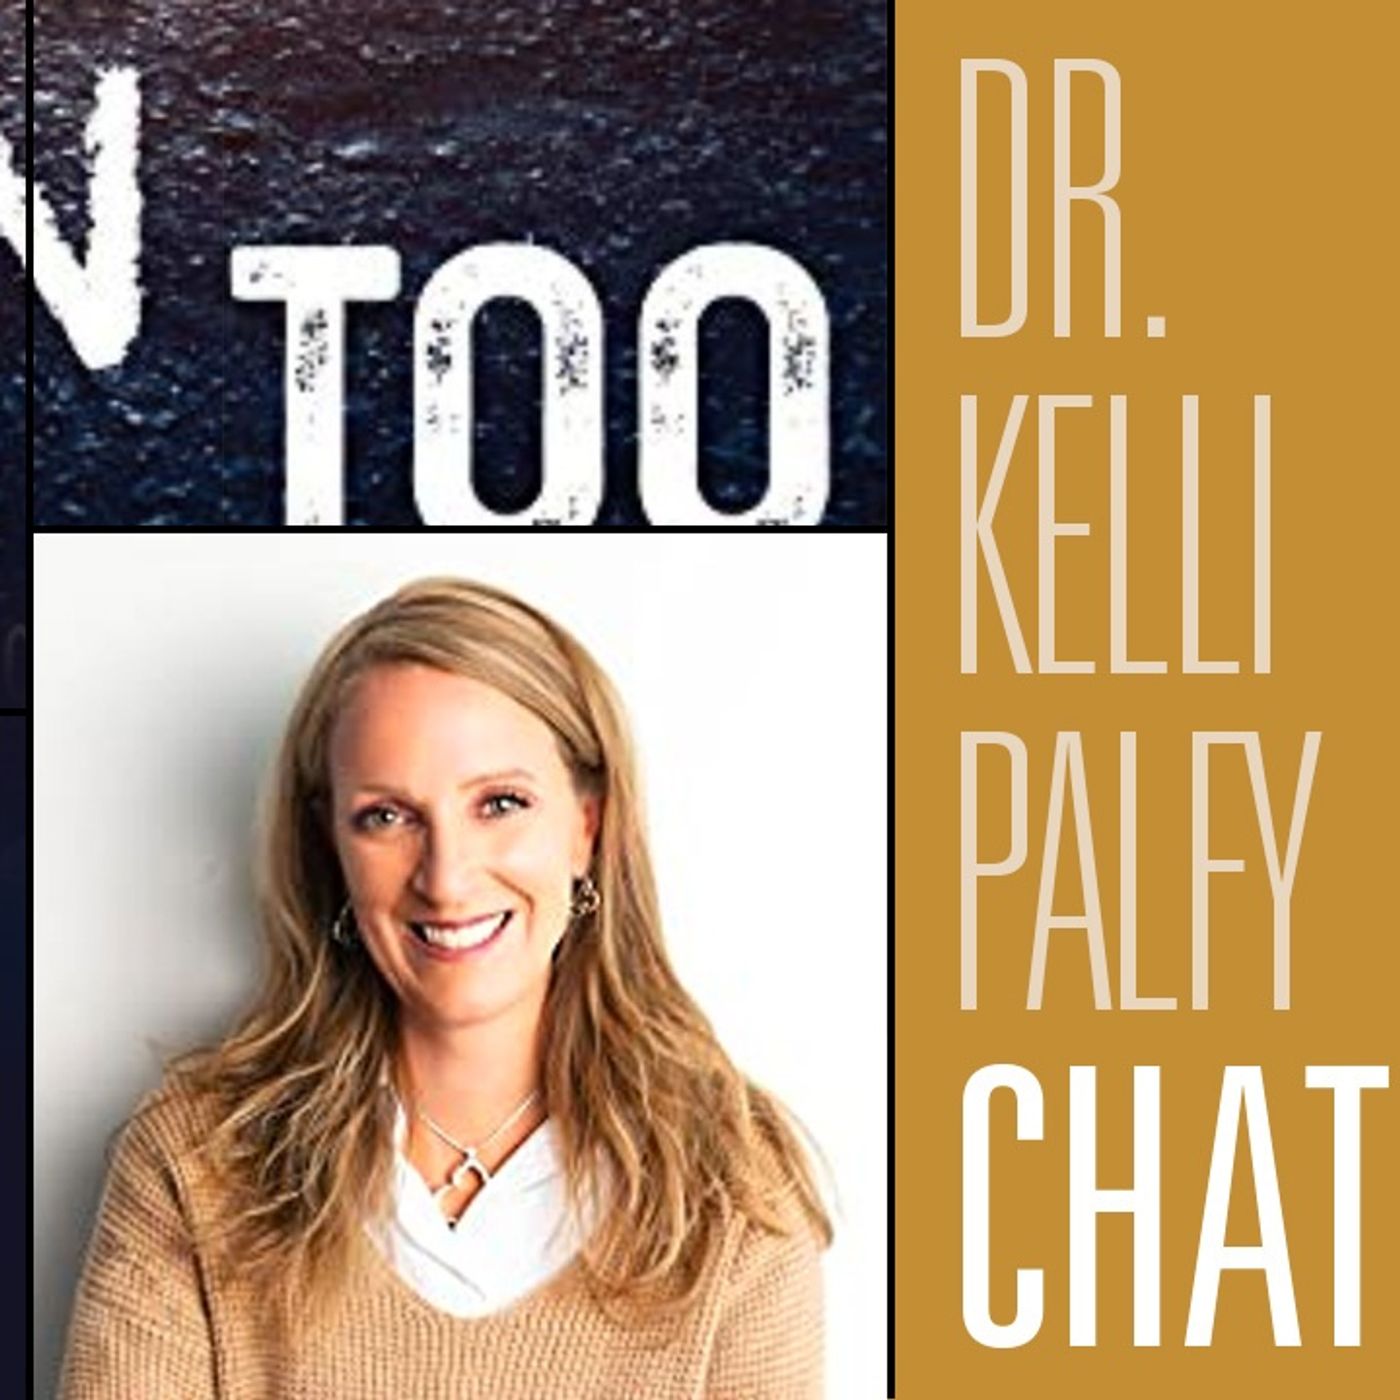 Talking Male Victims of Sexual Assault With Author Dr. Kelli Palfy | Fireside Chat 220